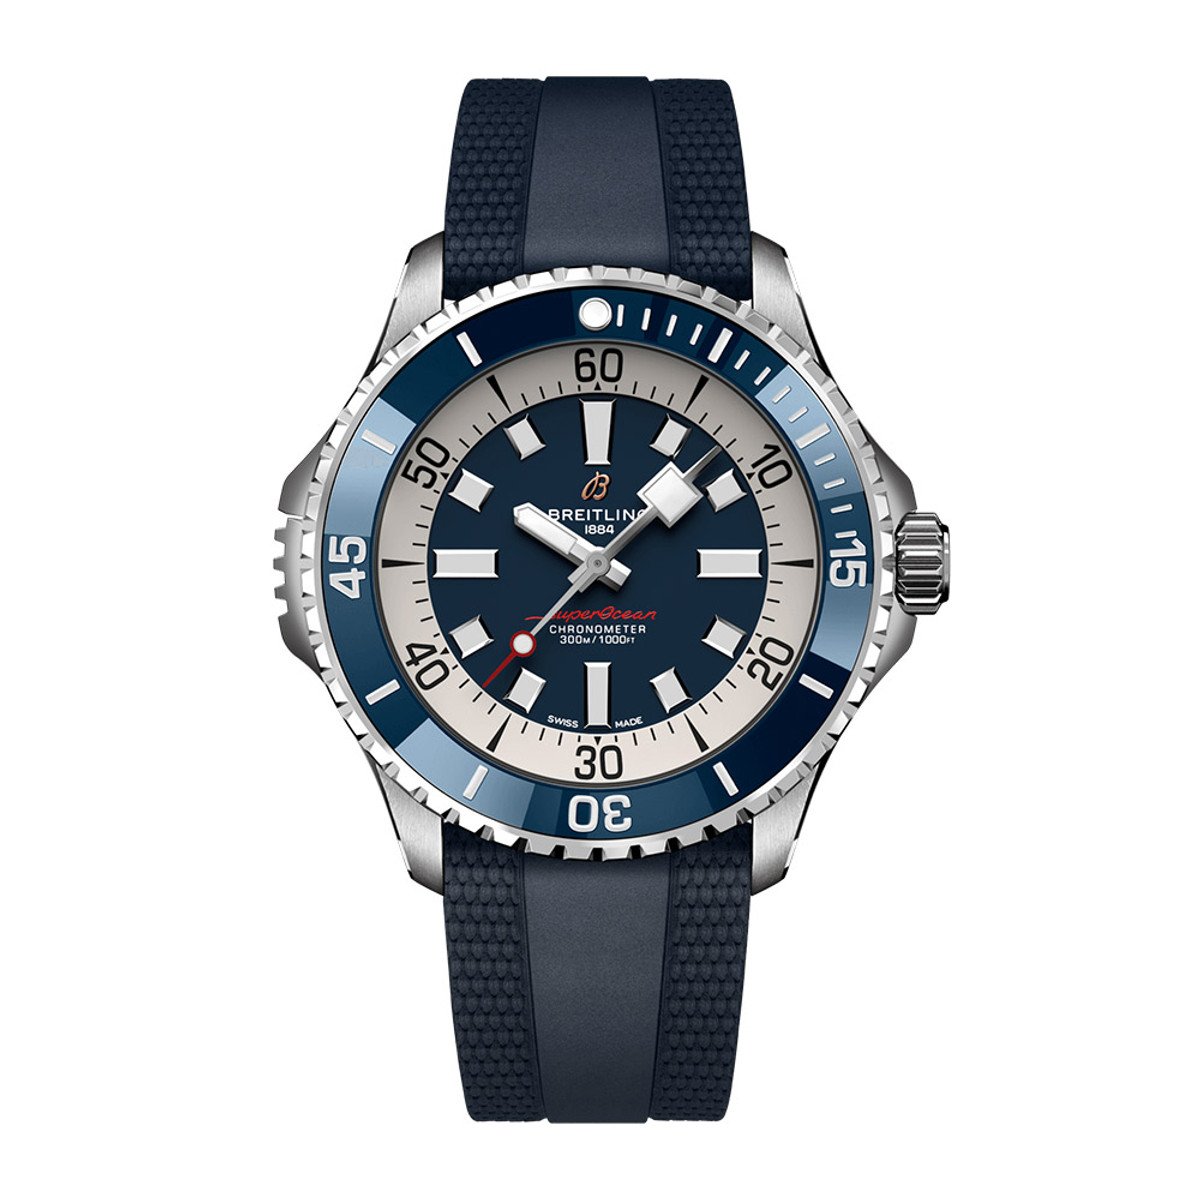 Breitling Superocean 46 Automatic A17378E71C1S1-43948 Product Image